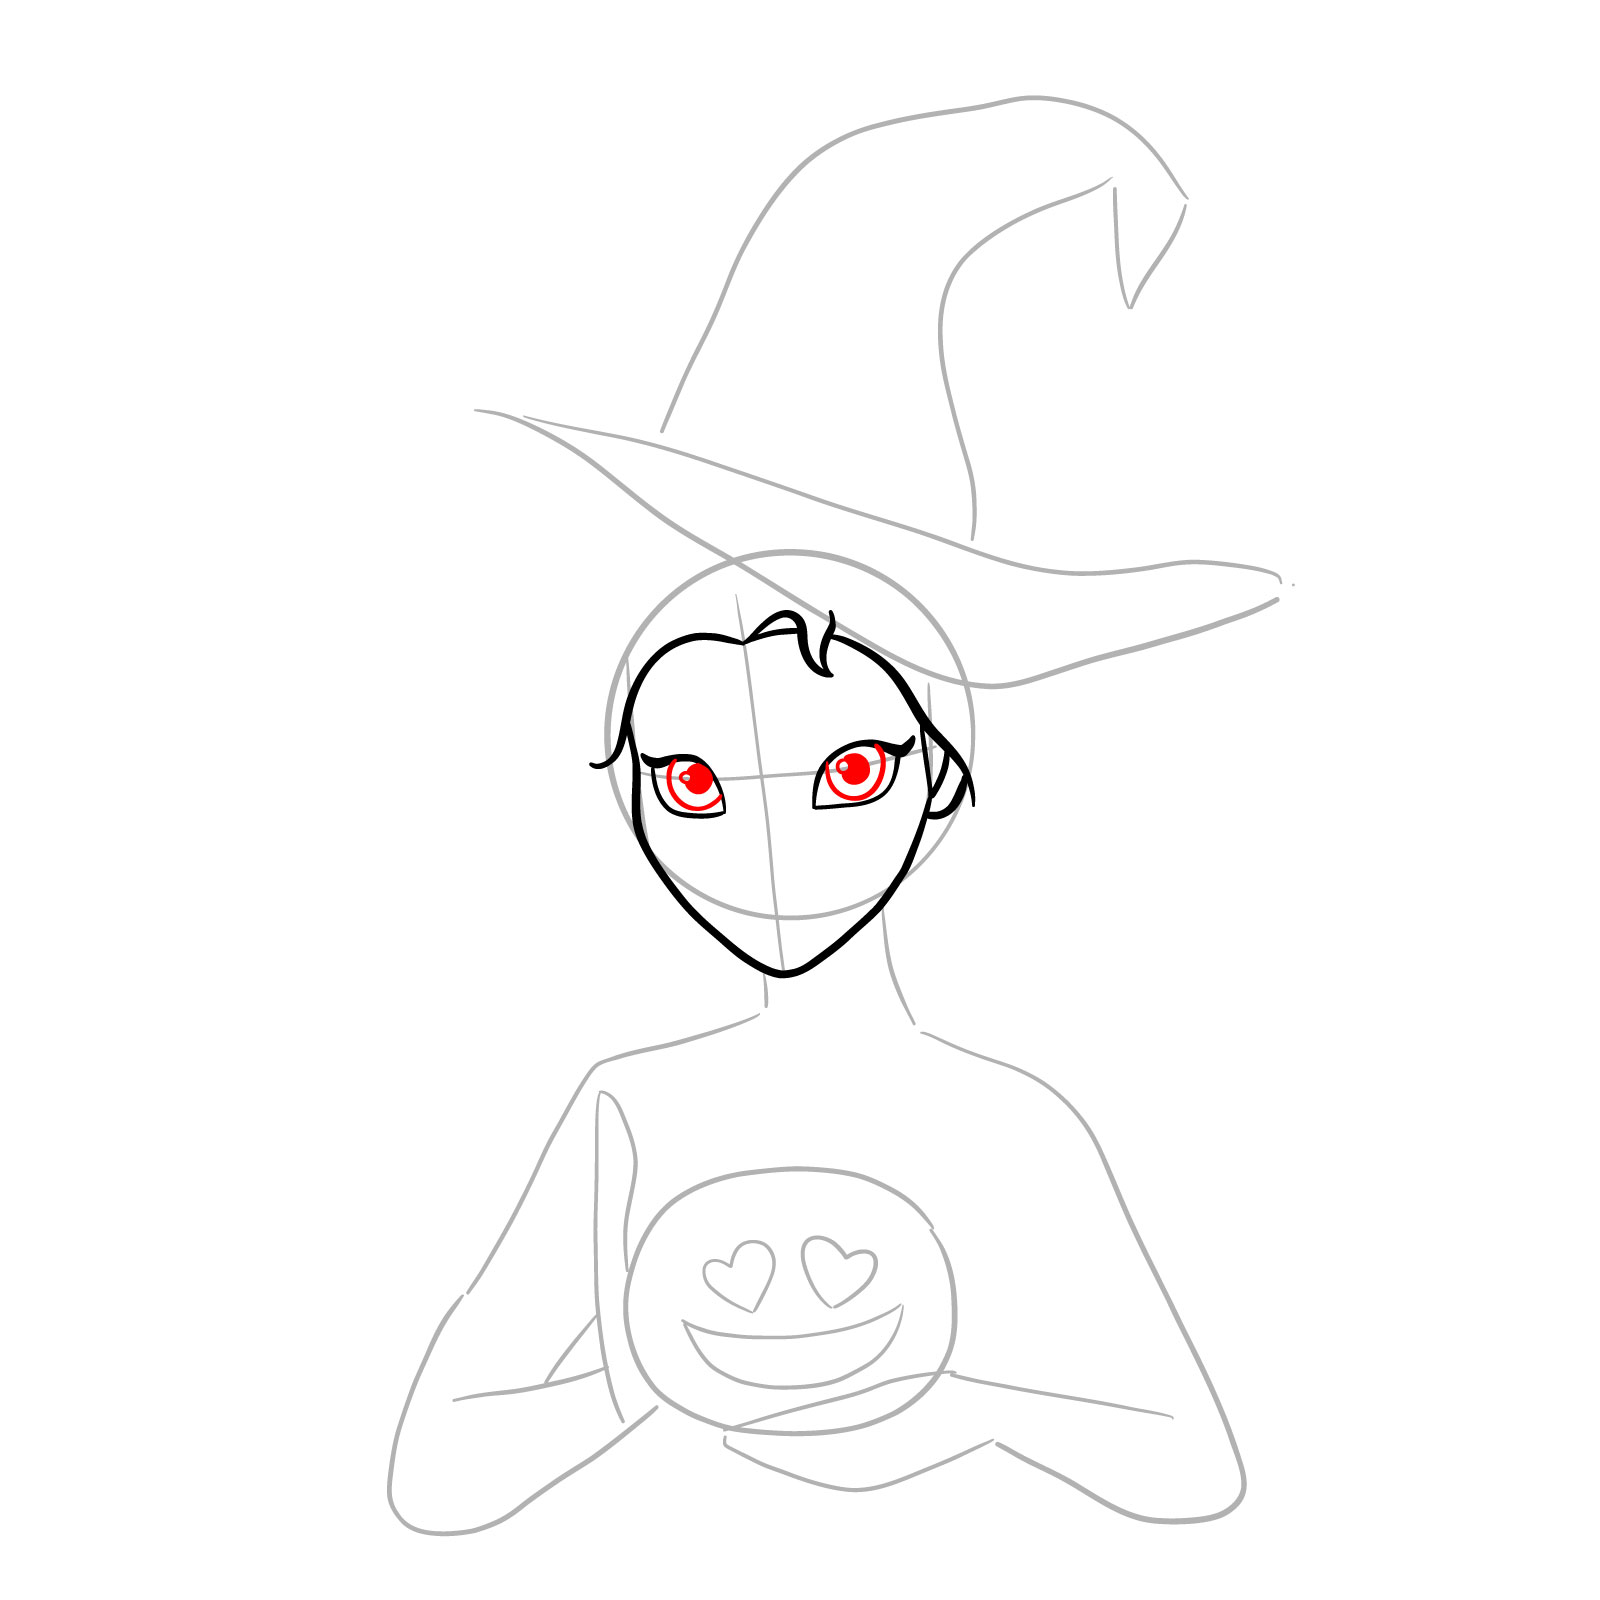 How to Draw Witch Elsa on Halloween - step 08